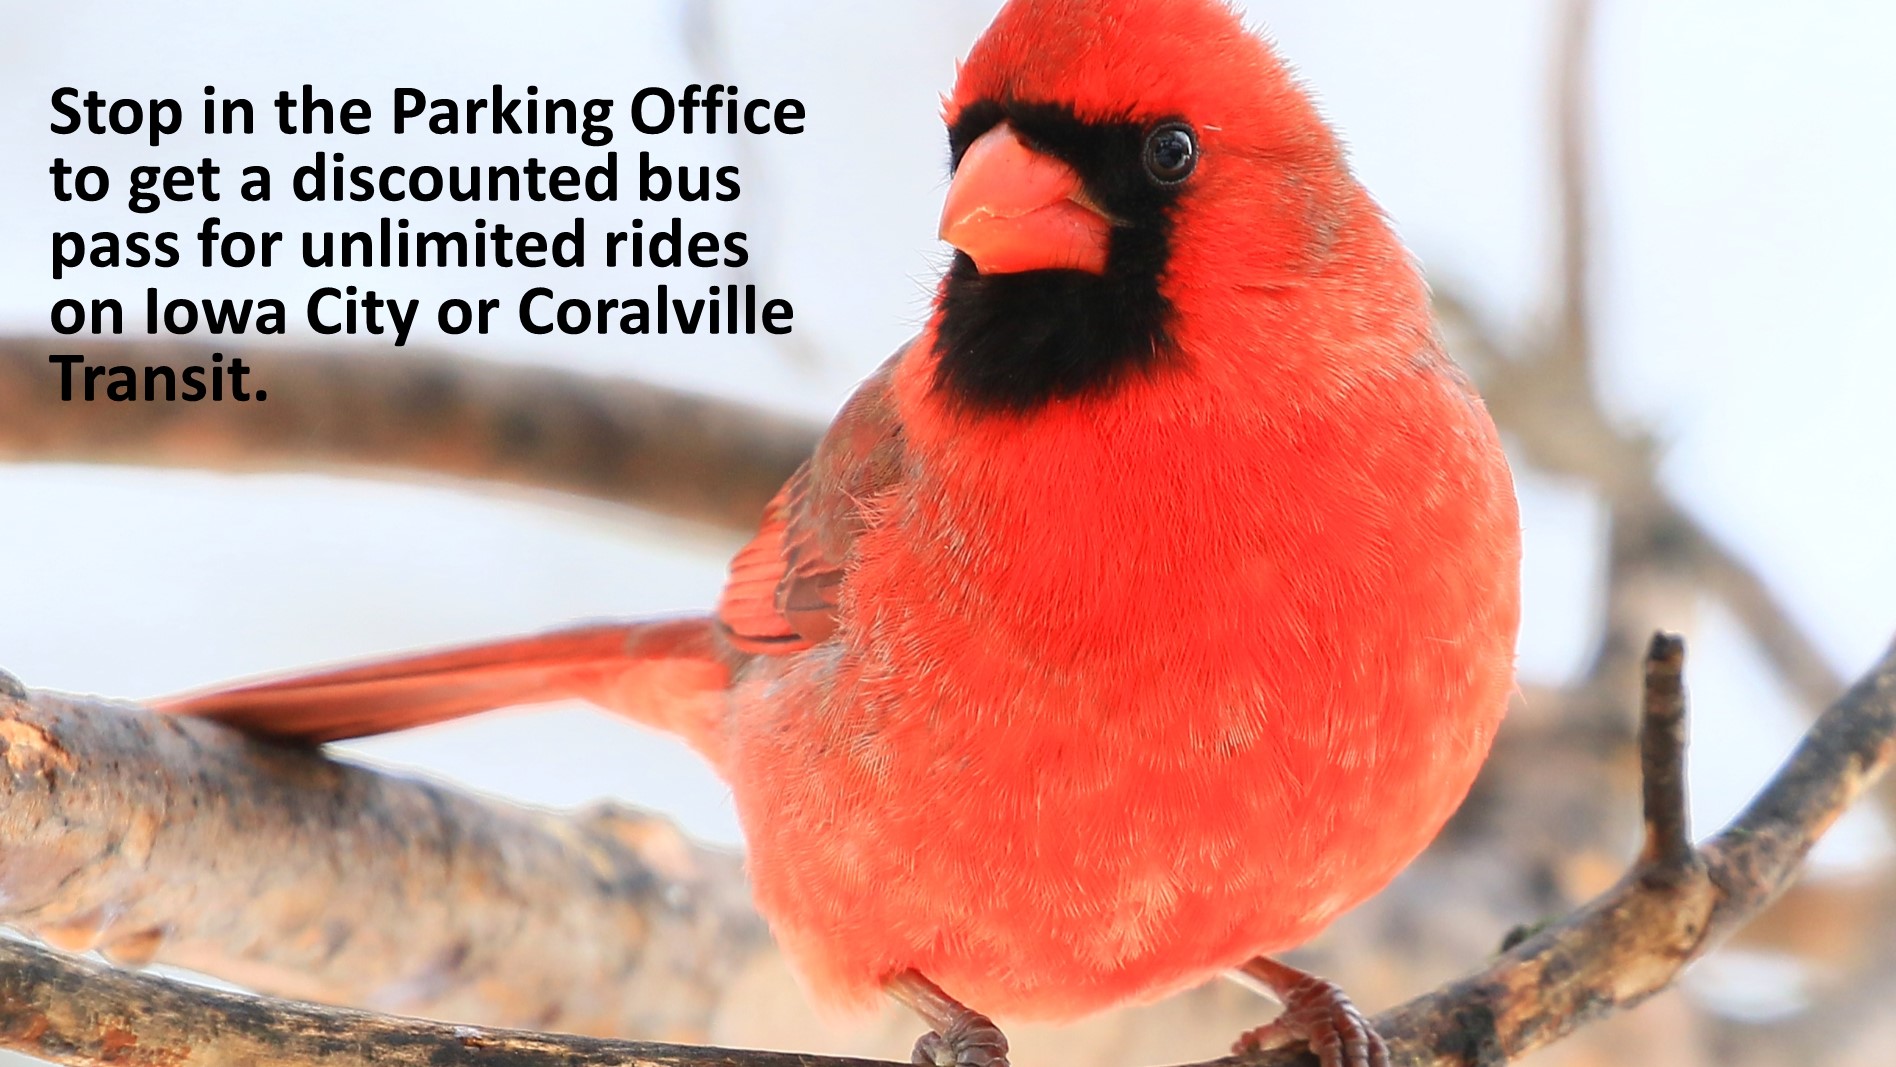 Discounted bus pass at Parking Office